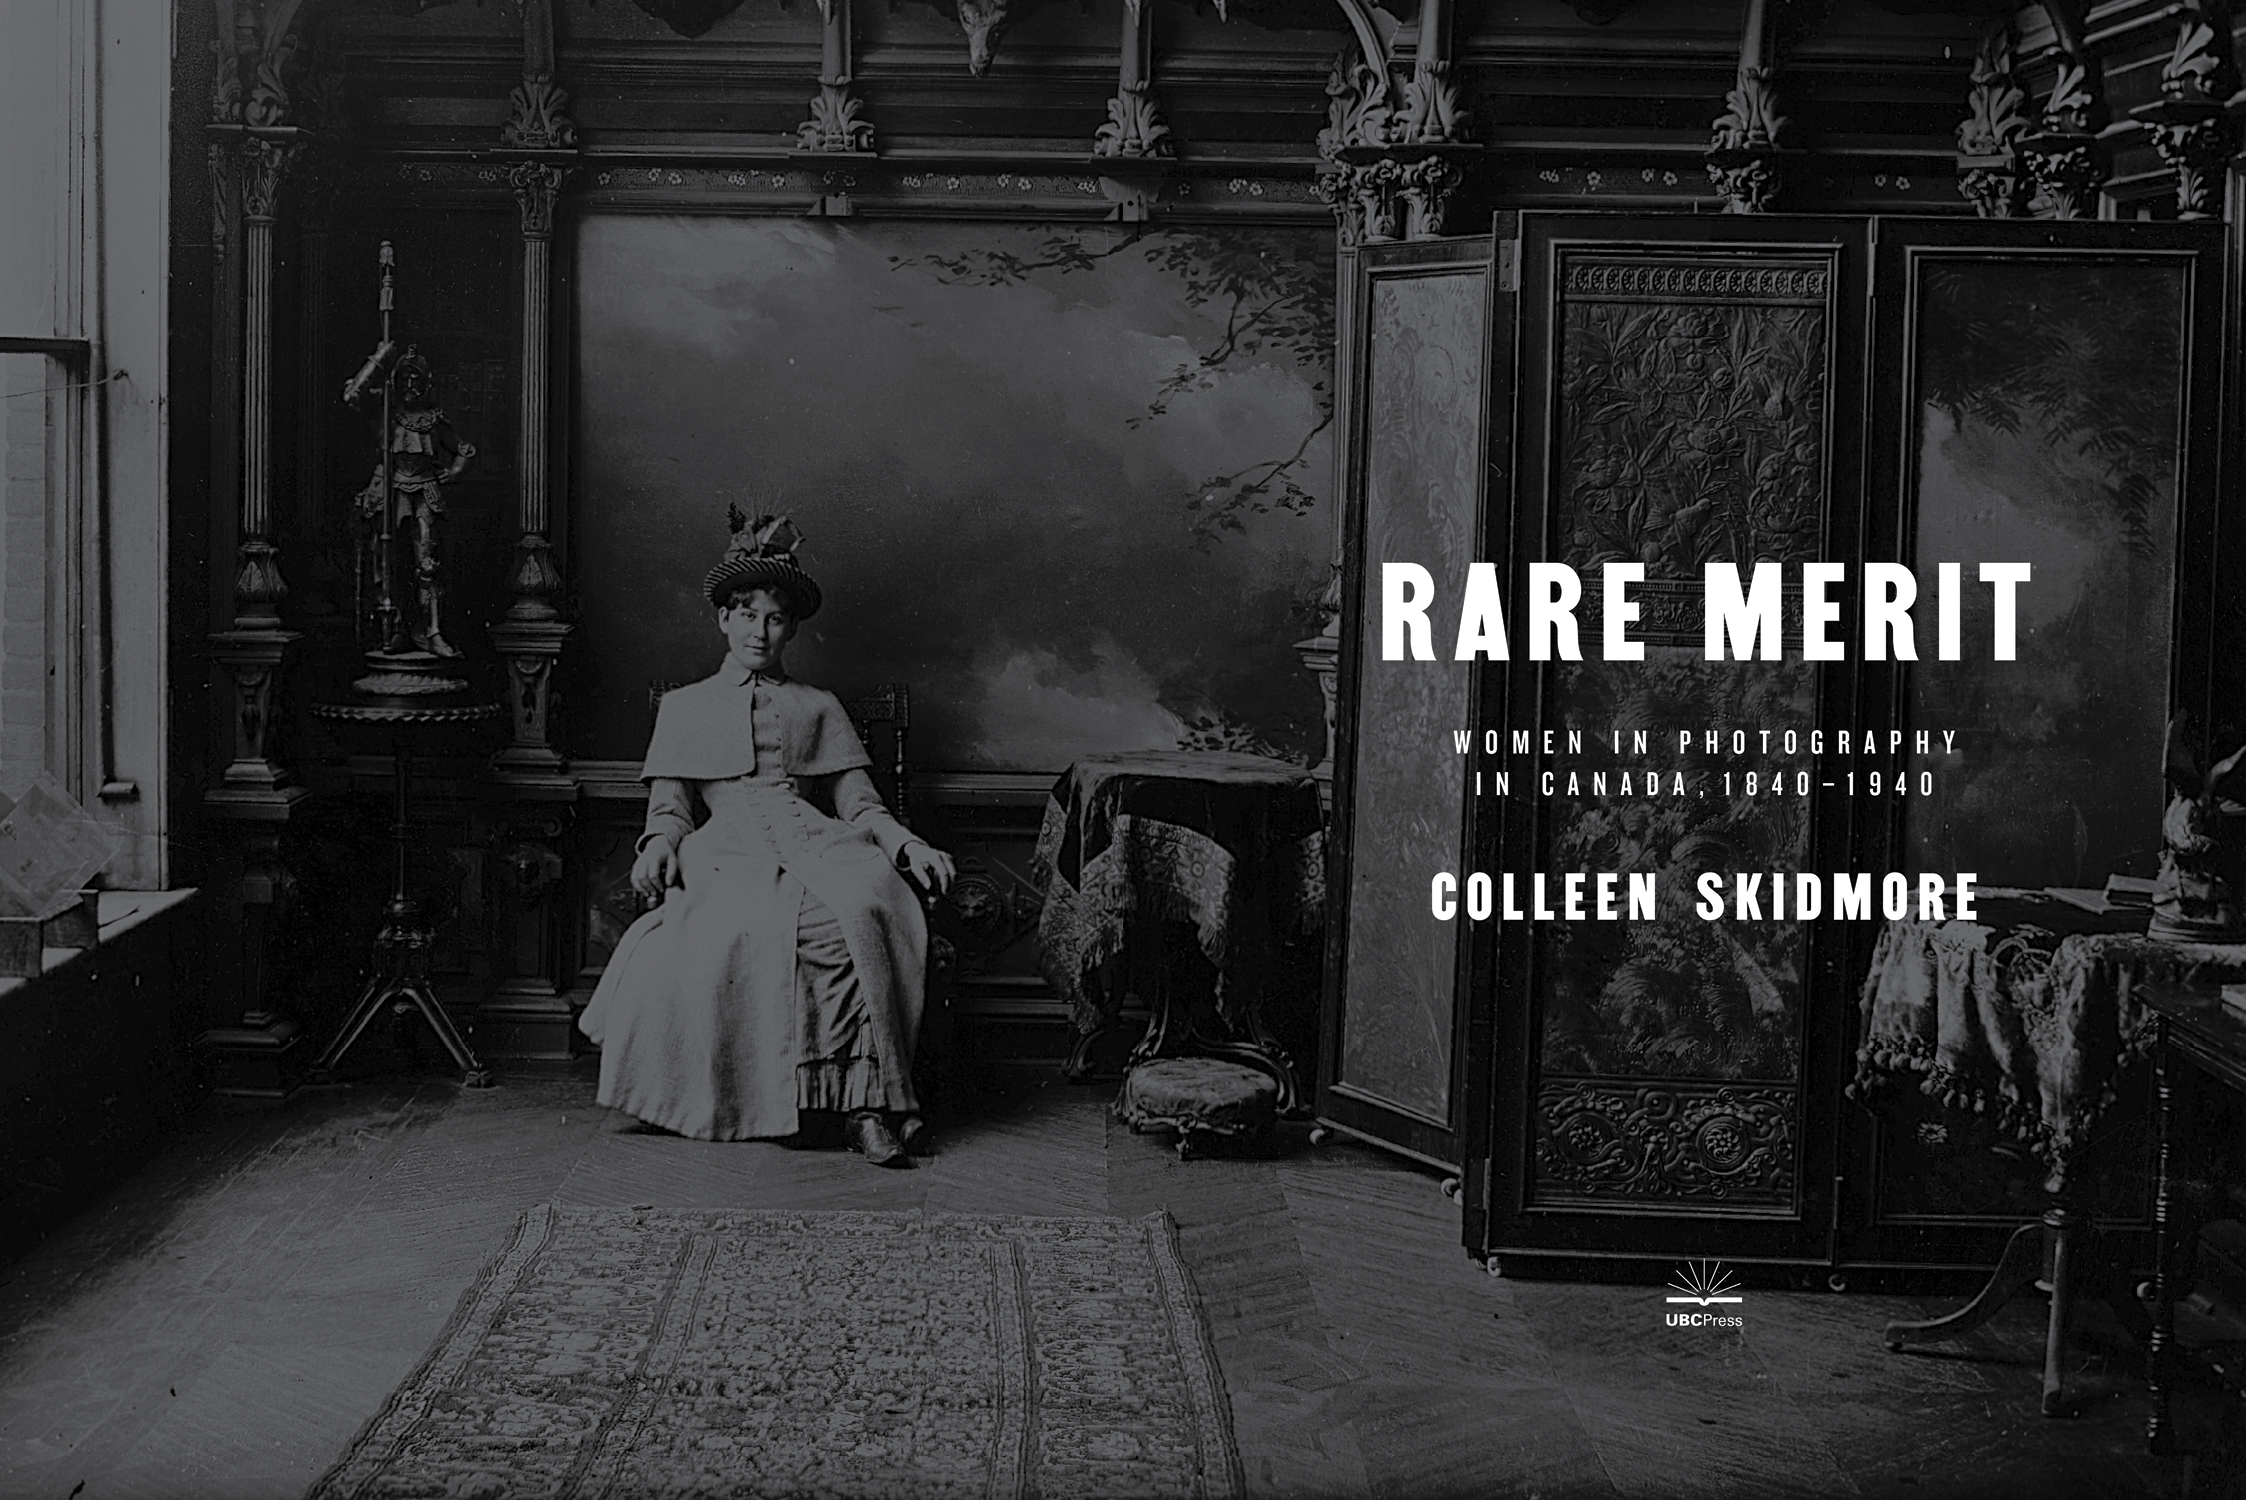 Title page image for ‘Rare Merit’ shows a black and white image of a woman sitting in an elaborately decorated room. The woman is wearing a dress, circa early 1900s, and a fancy hat.